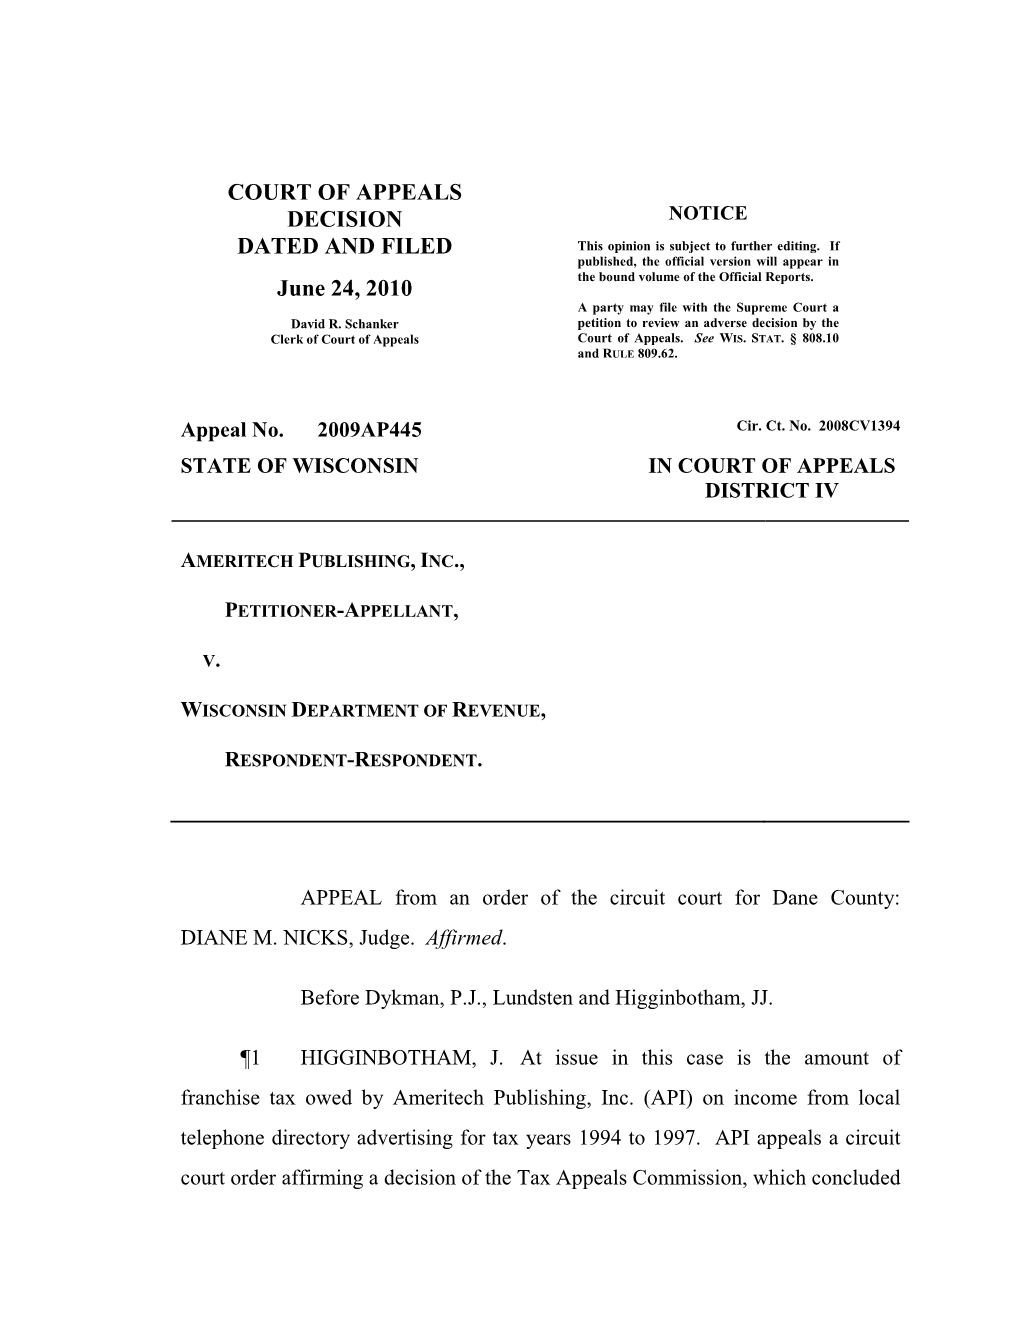 COURT of APPEALS DECISION DATED and FILED June 24, 2010